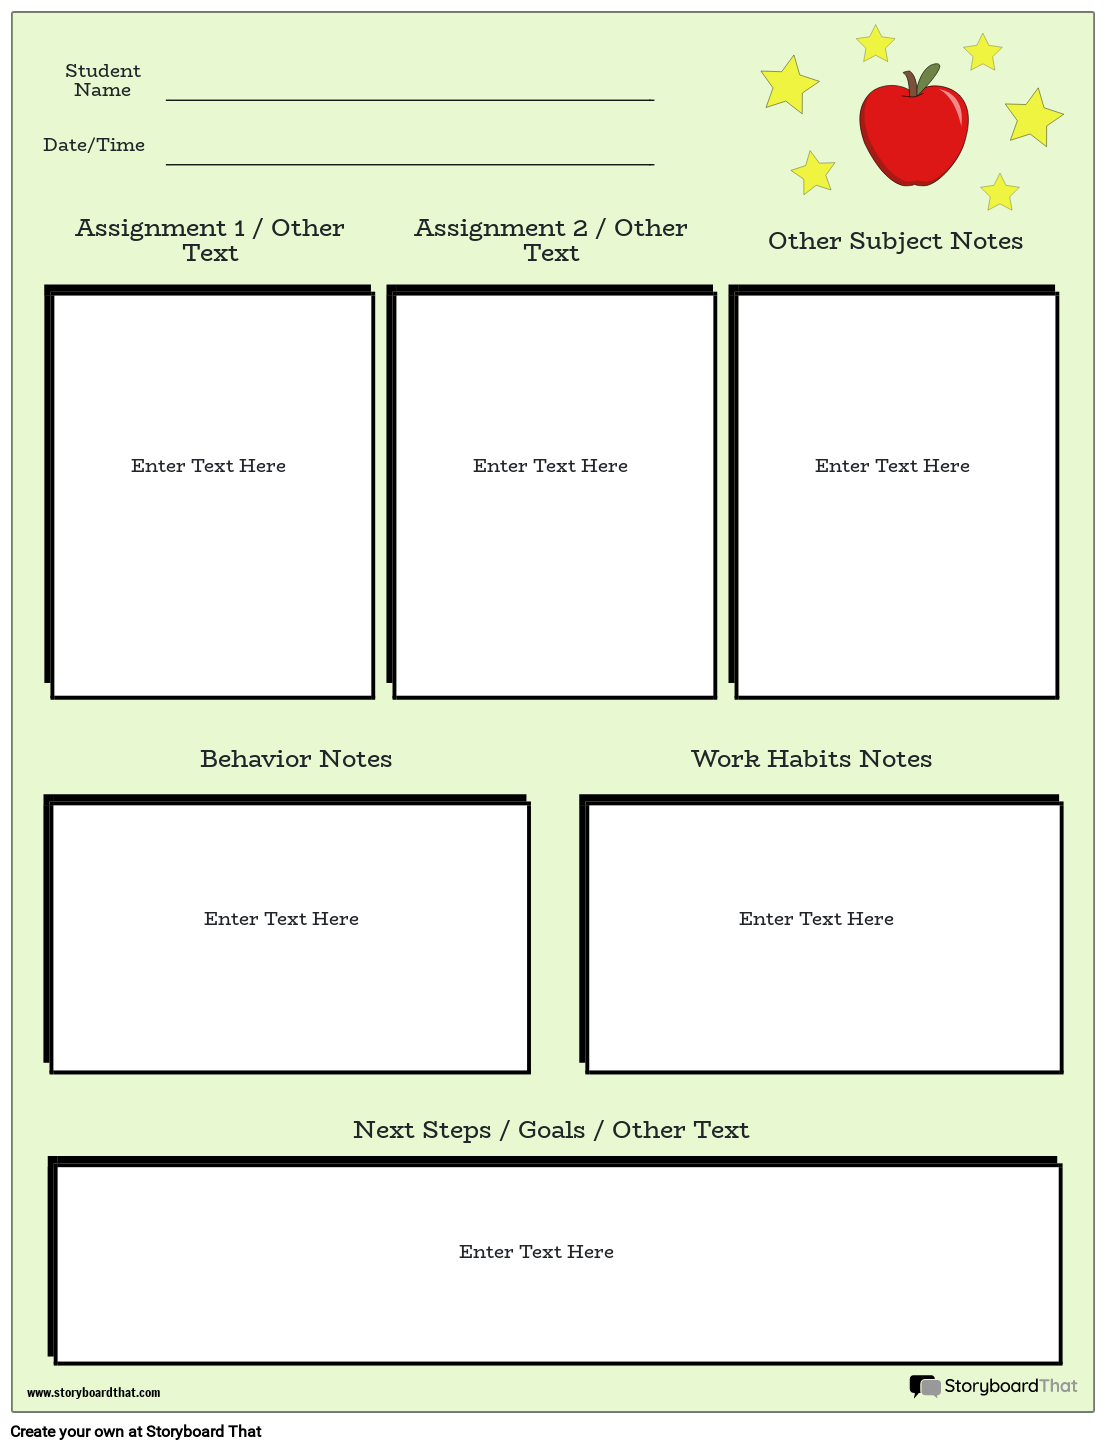 Student/ Teacher Conference Template Featuring an Apple